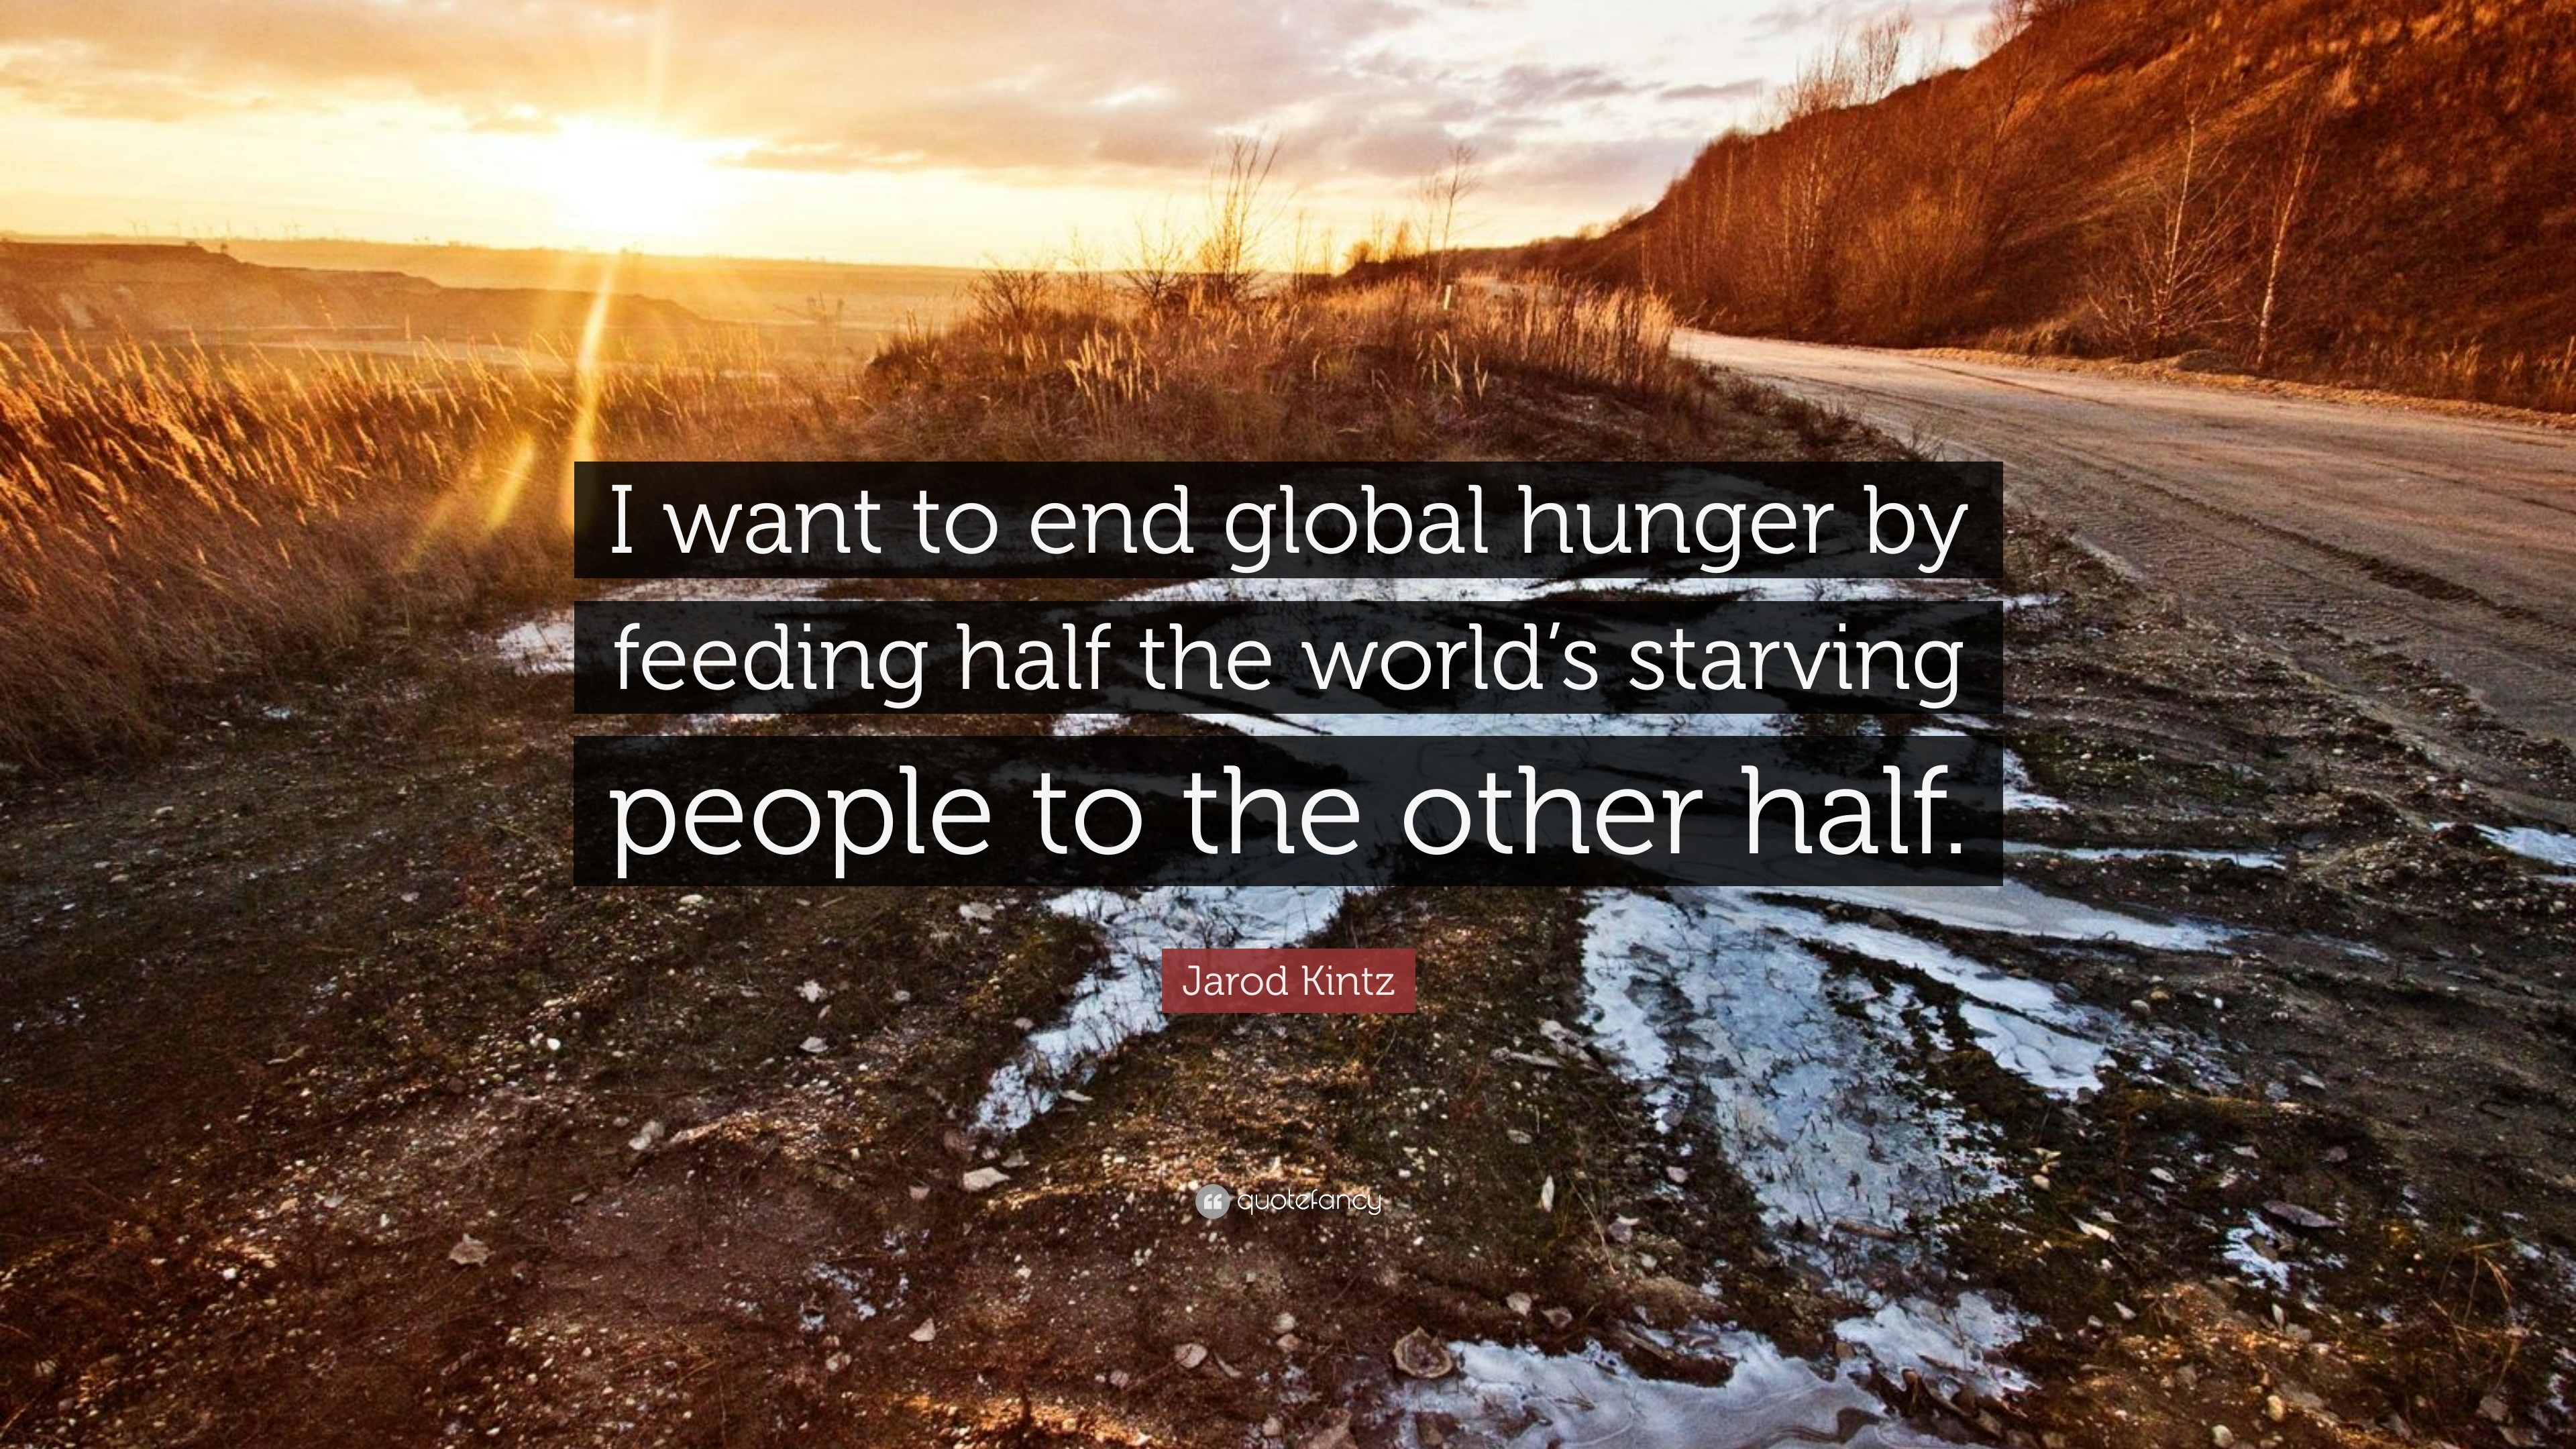 Jarod Kintz Quote I Want To End Global Hunger By Feeding Half The Worlds Starving People To